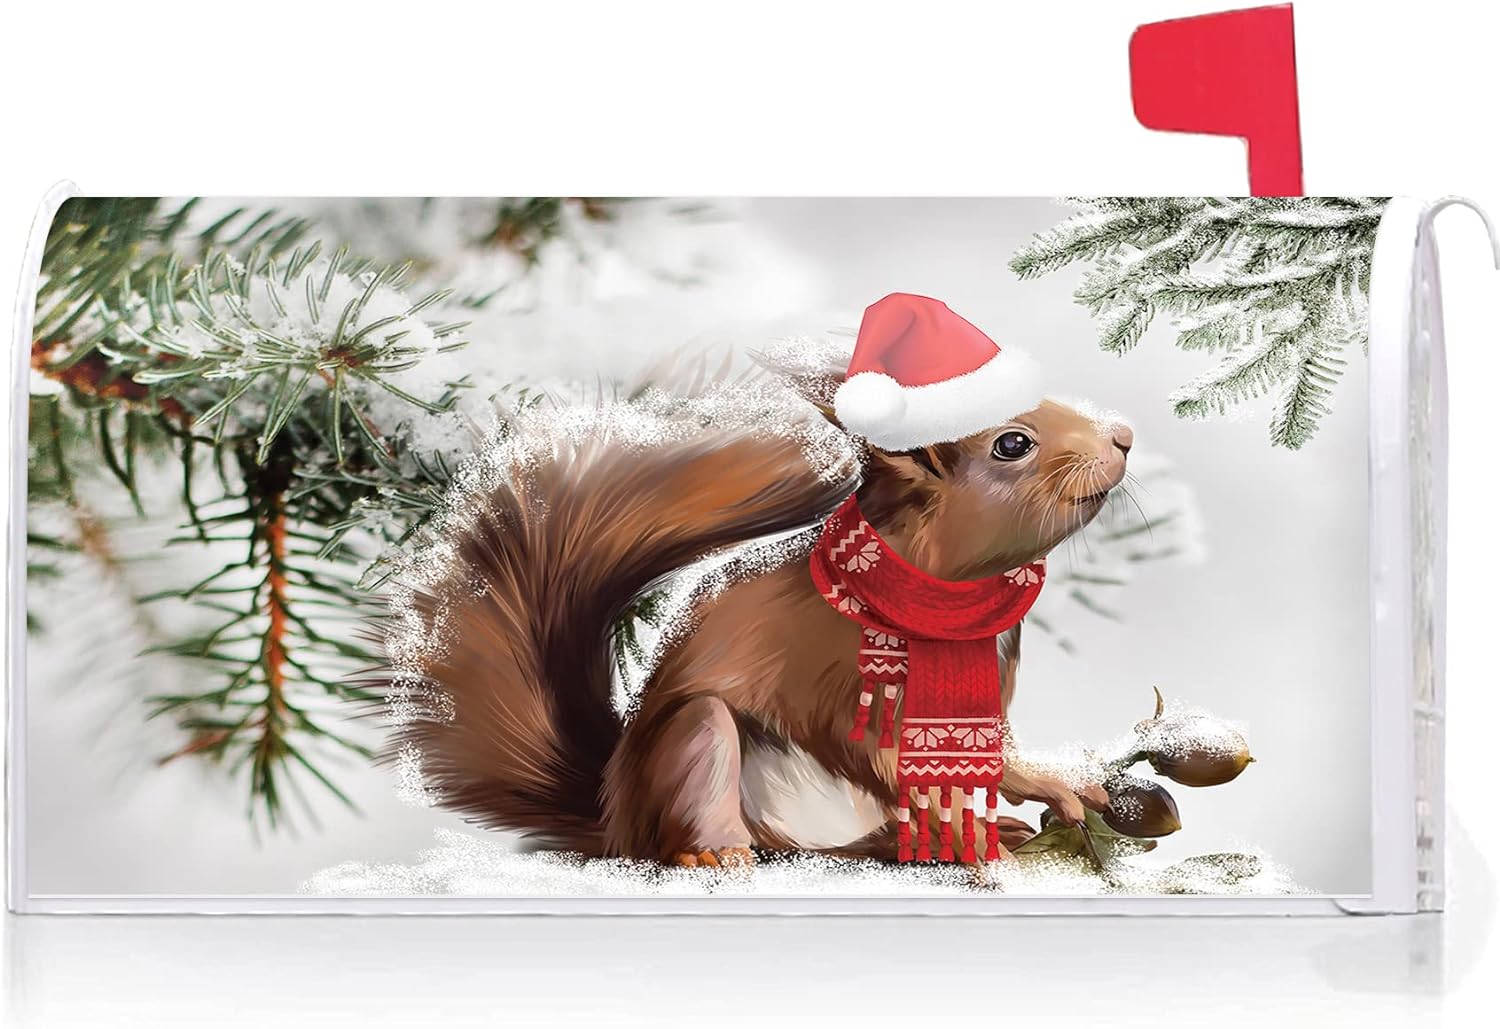 KE RUI Texupday Winter Cute Red Scarf Squirrel Decoration Mailbox Cover with Magnetic Strip Christmas Mailbox Wraps Post Letter Box Co